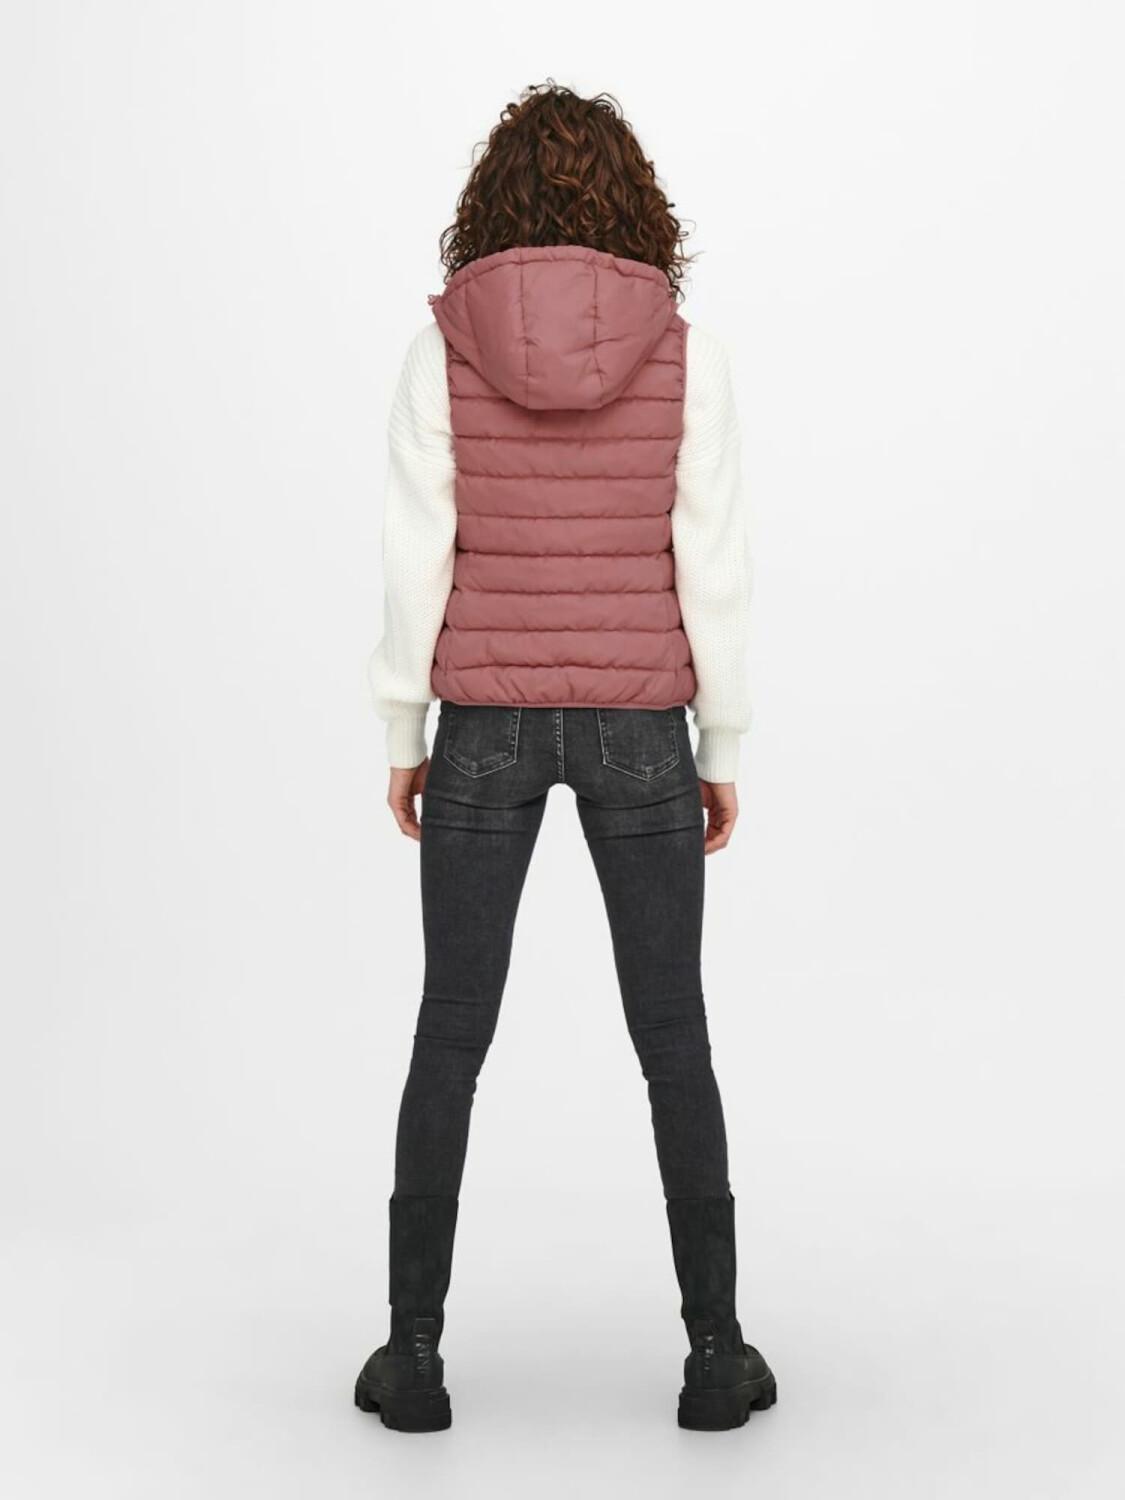 bei (15205760) Only rose Waistcoat 29,99 Tahoe ab New | withered Preisvergleich Hood €